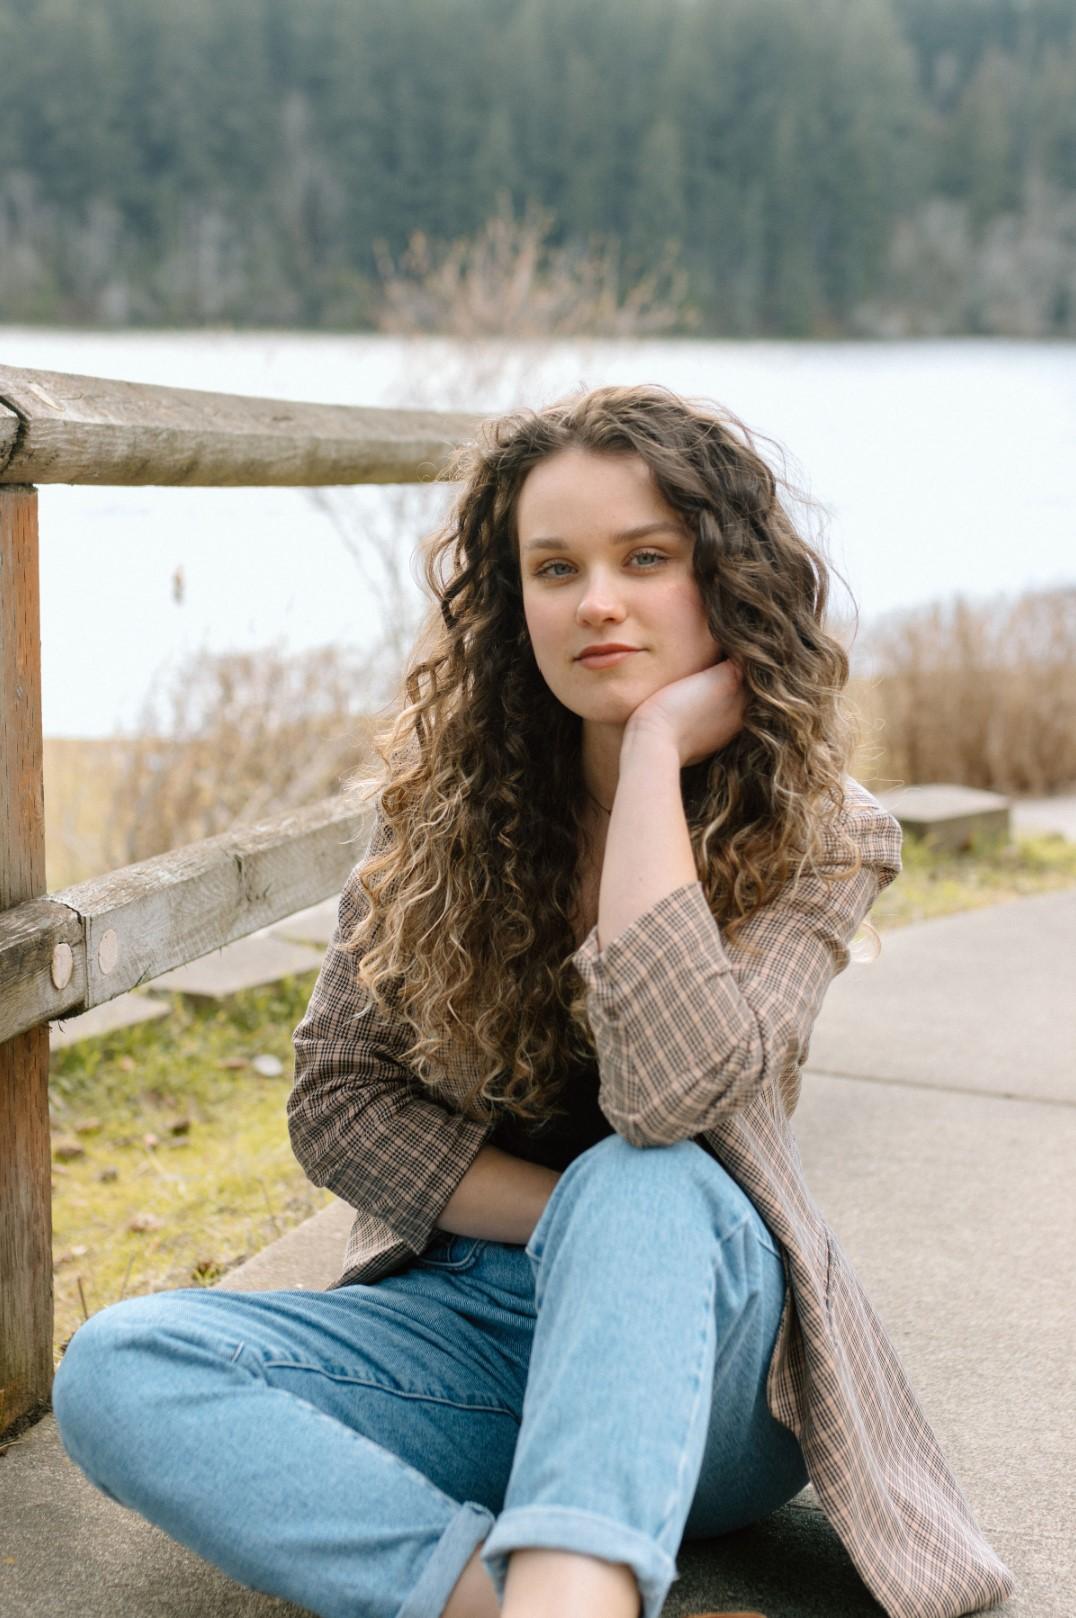 A person with long, curly hair resting their head on their hand, elbow on their knee, sitting on cement next to a fence by a lake.